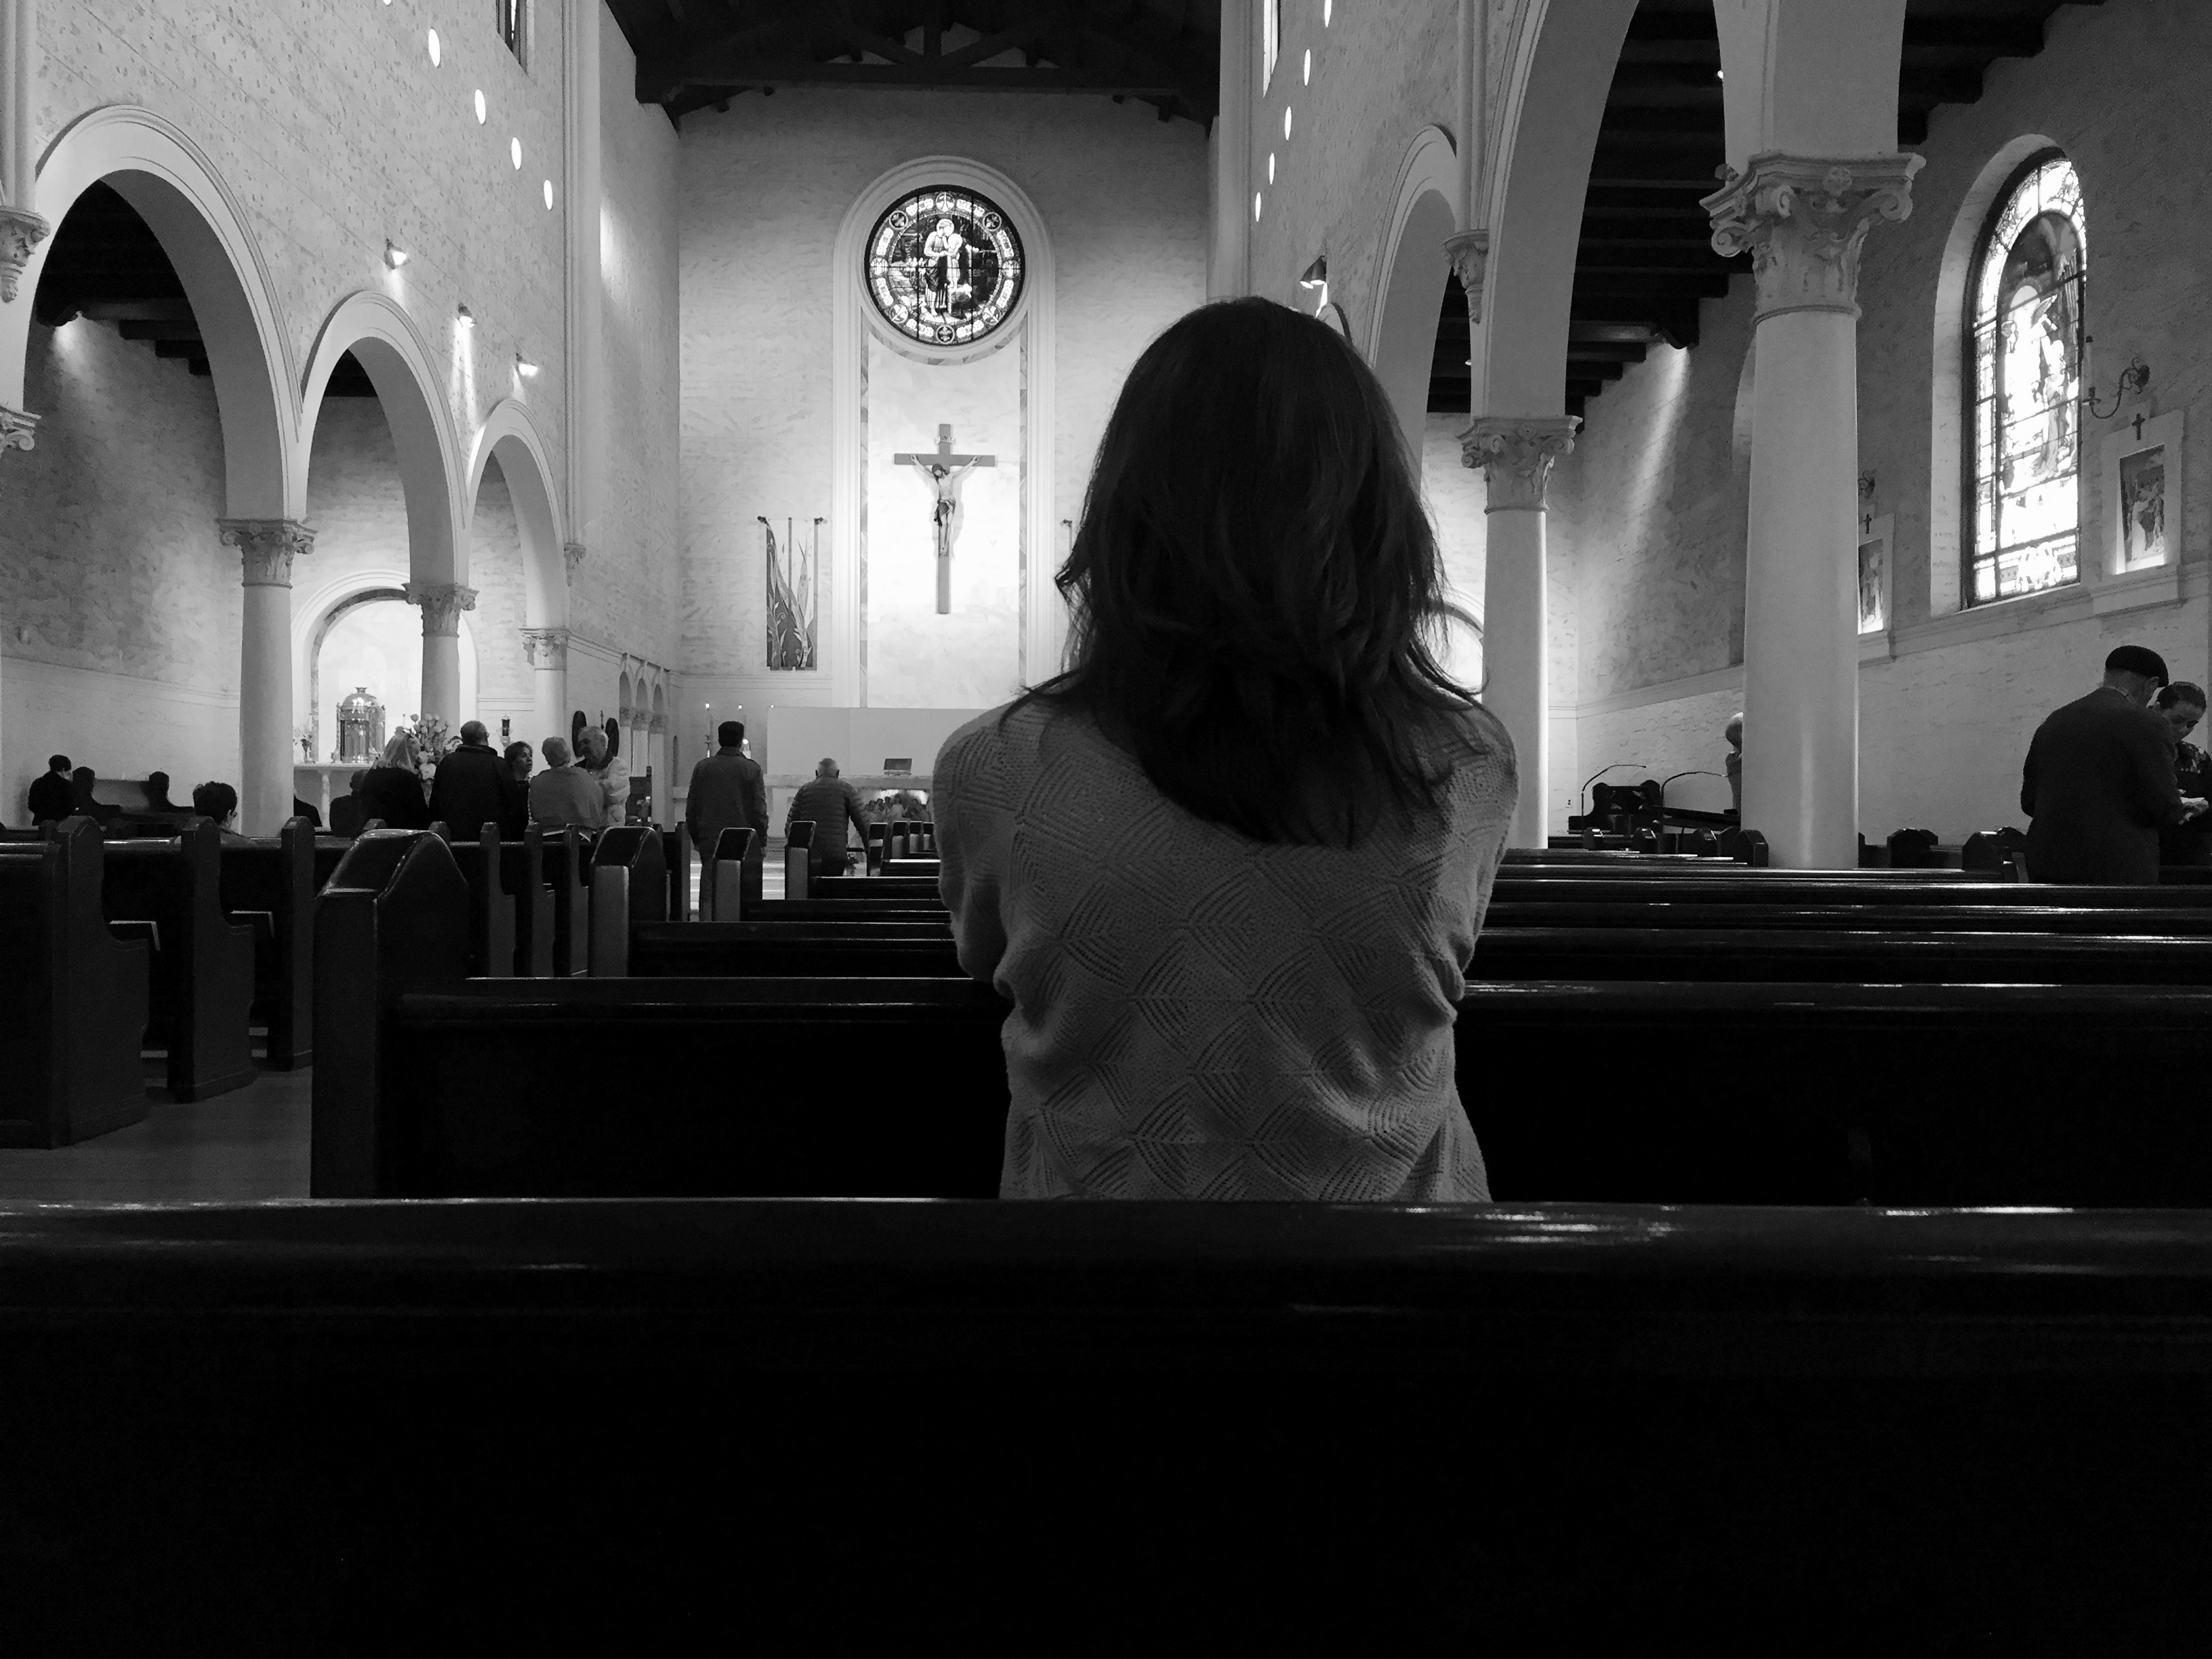 Believe It or Not, I Fell In Love With Going to Church